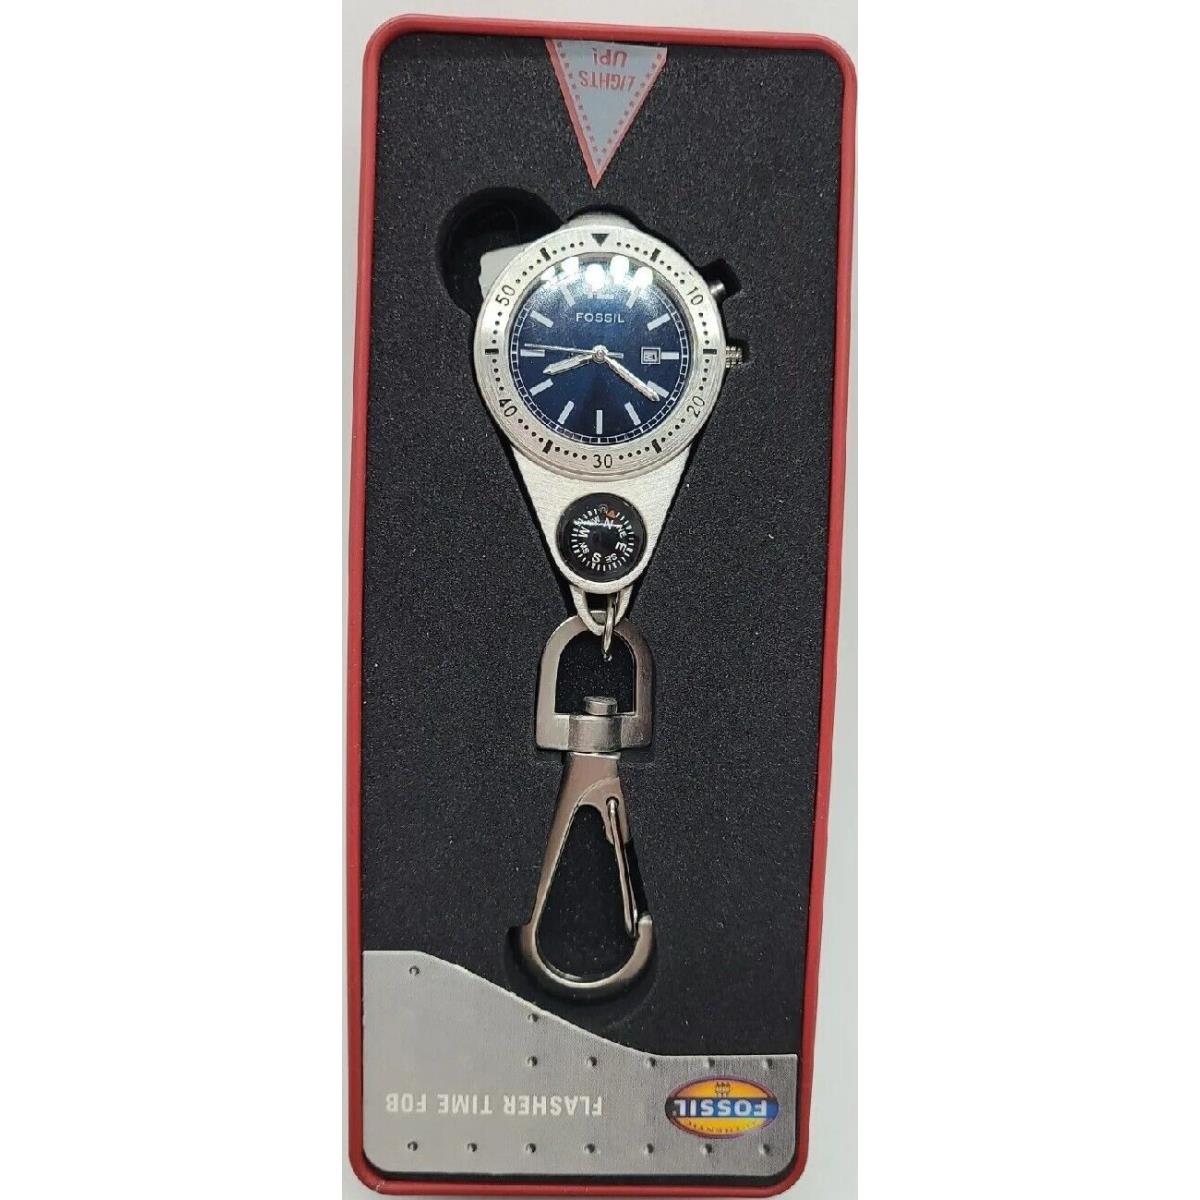 Fossil Time Fob Watch Compass Clip Key Chain On with Flasher Light Vintage